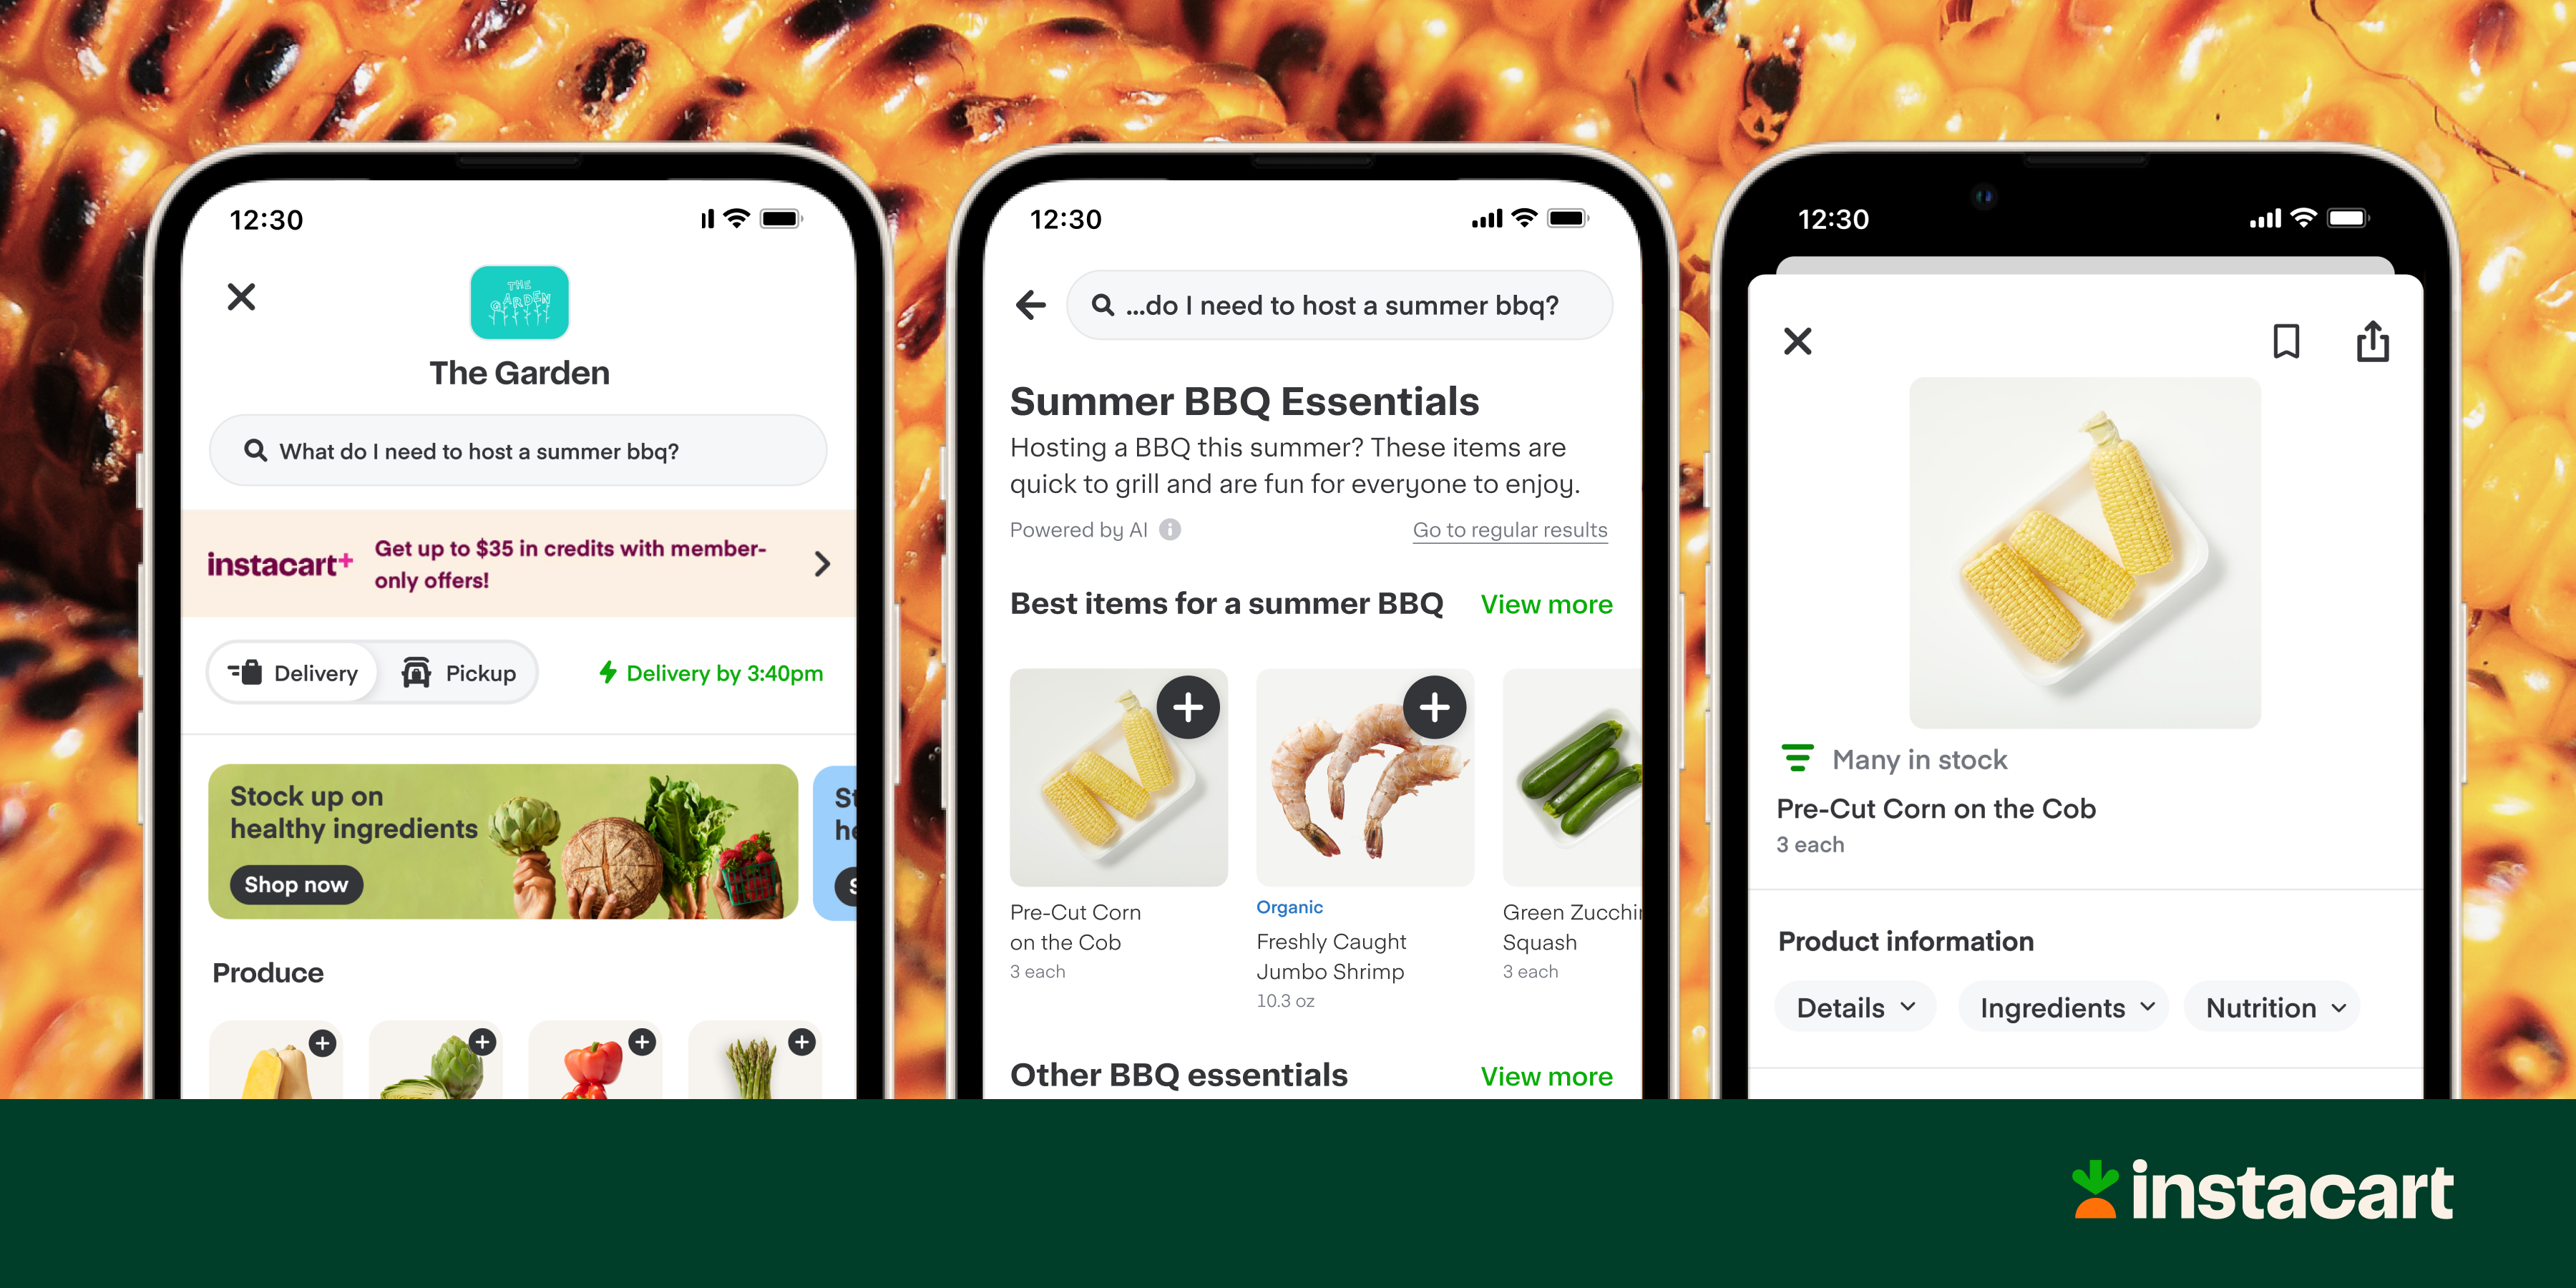 Instacart's new AI-powered search experience